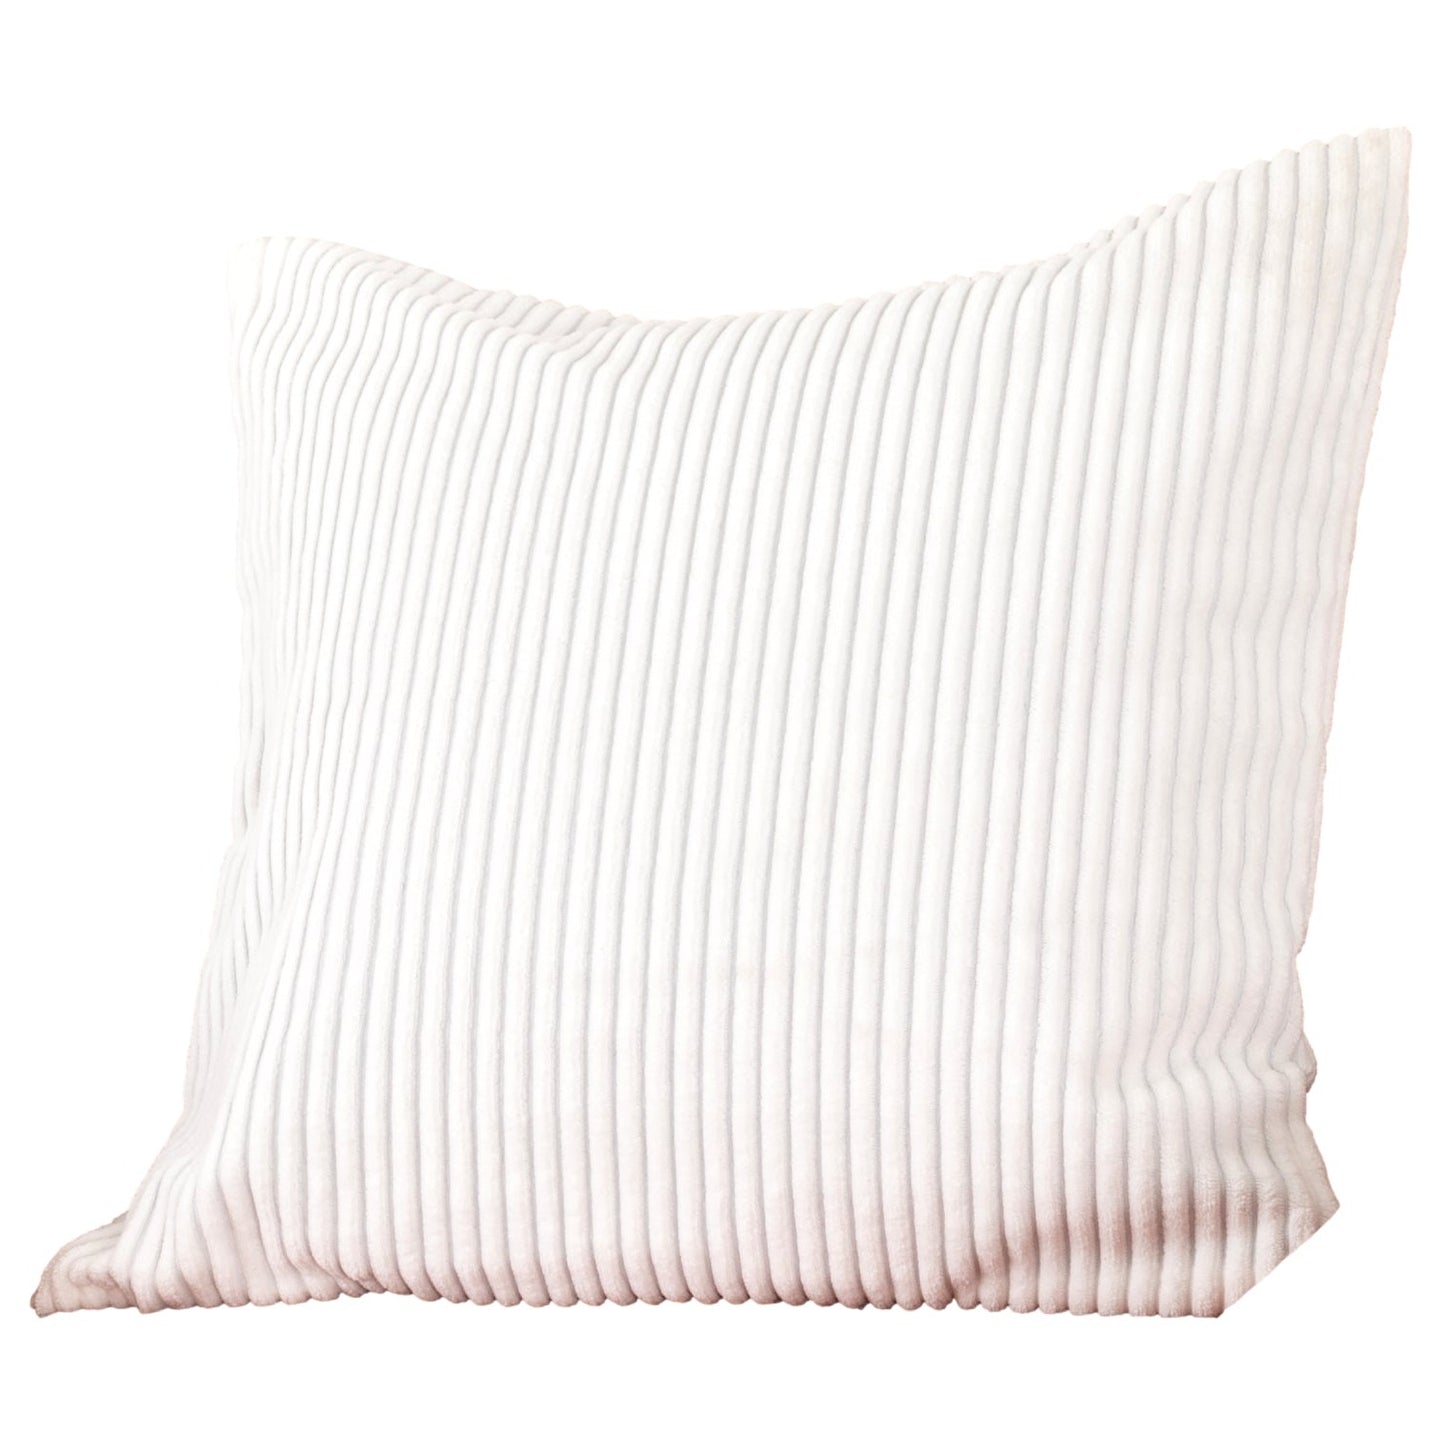 White corduroy cushion cover by Native